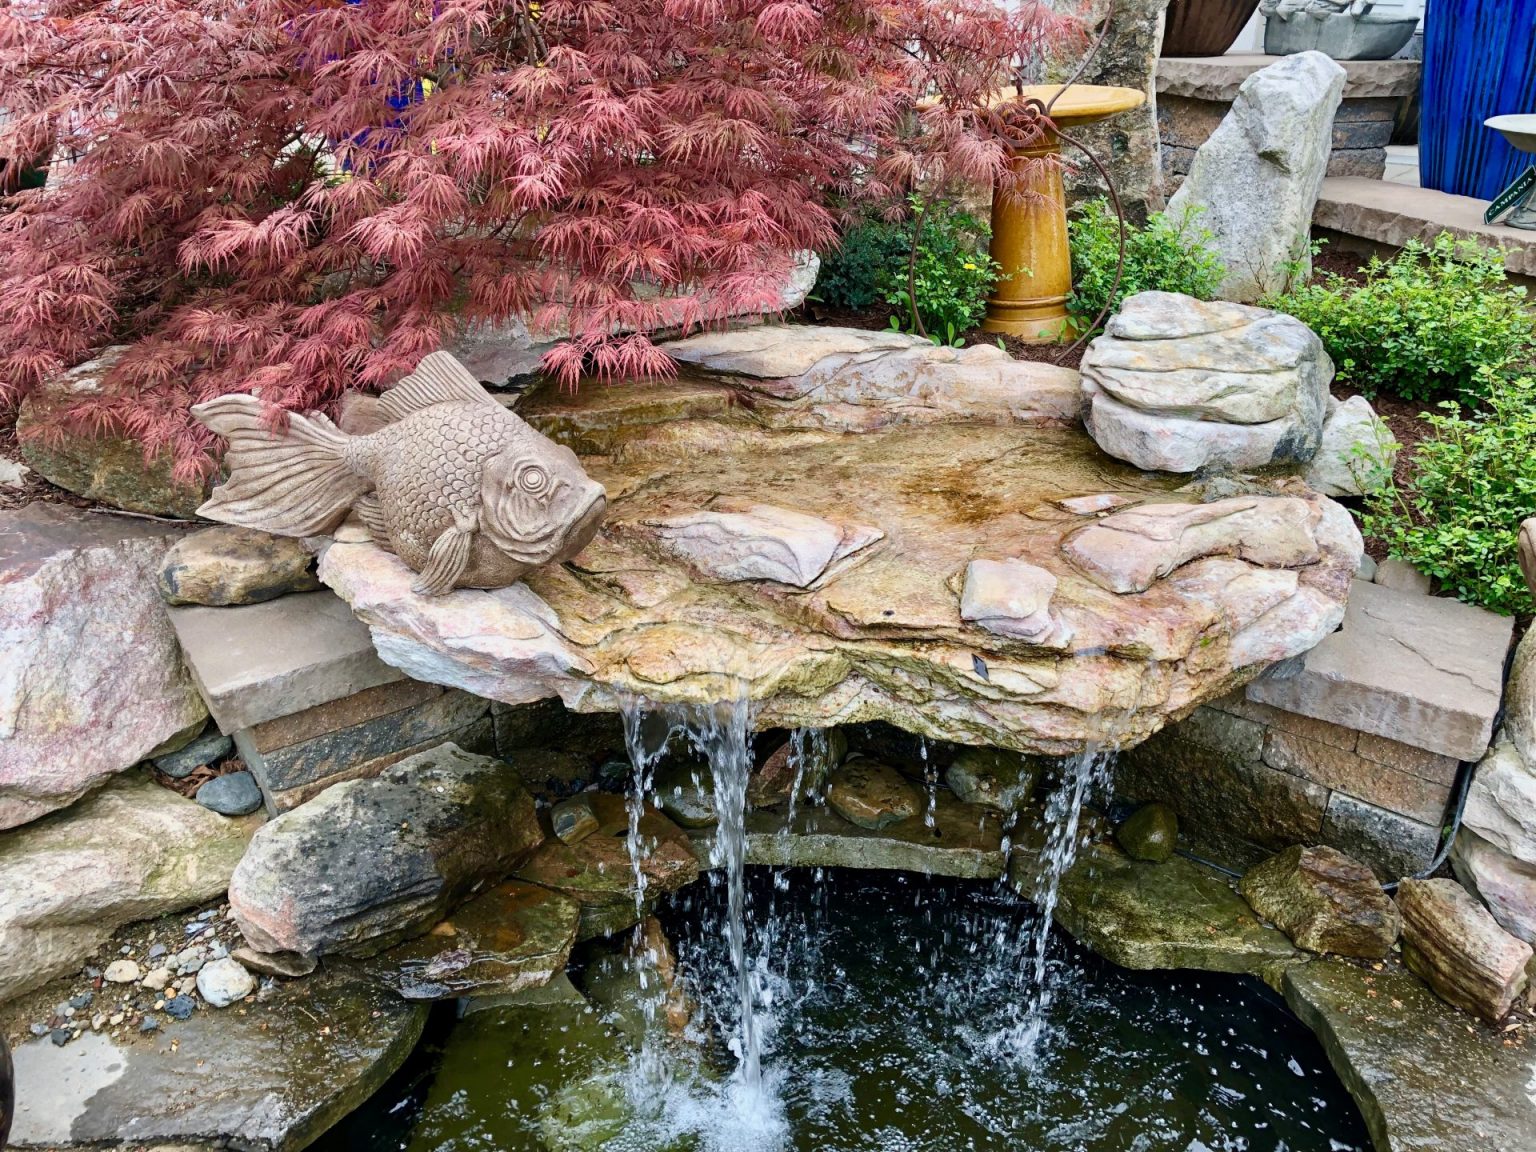 A Beautiful Landscaped Water Feature Provides A T 2021 08 30 09 24 05 Utc